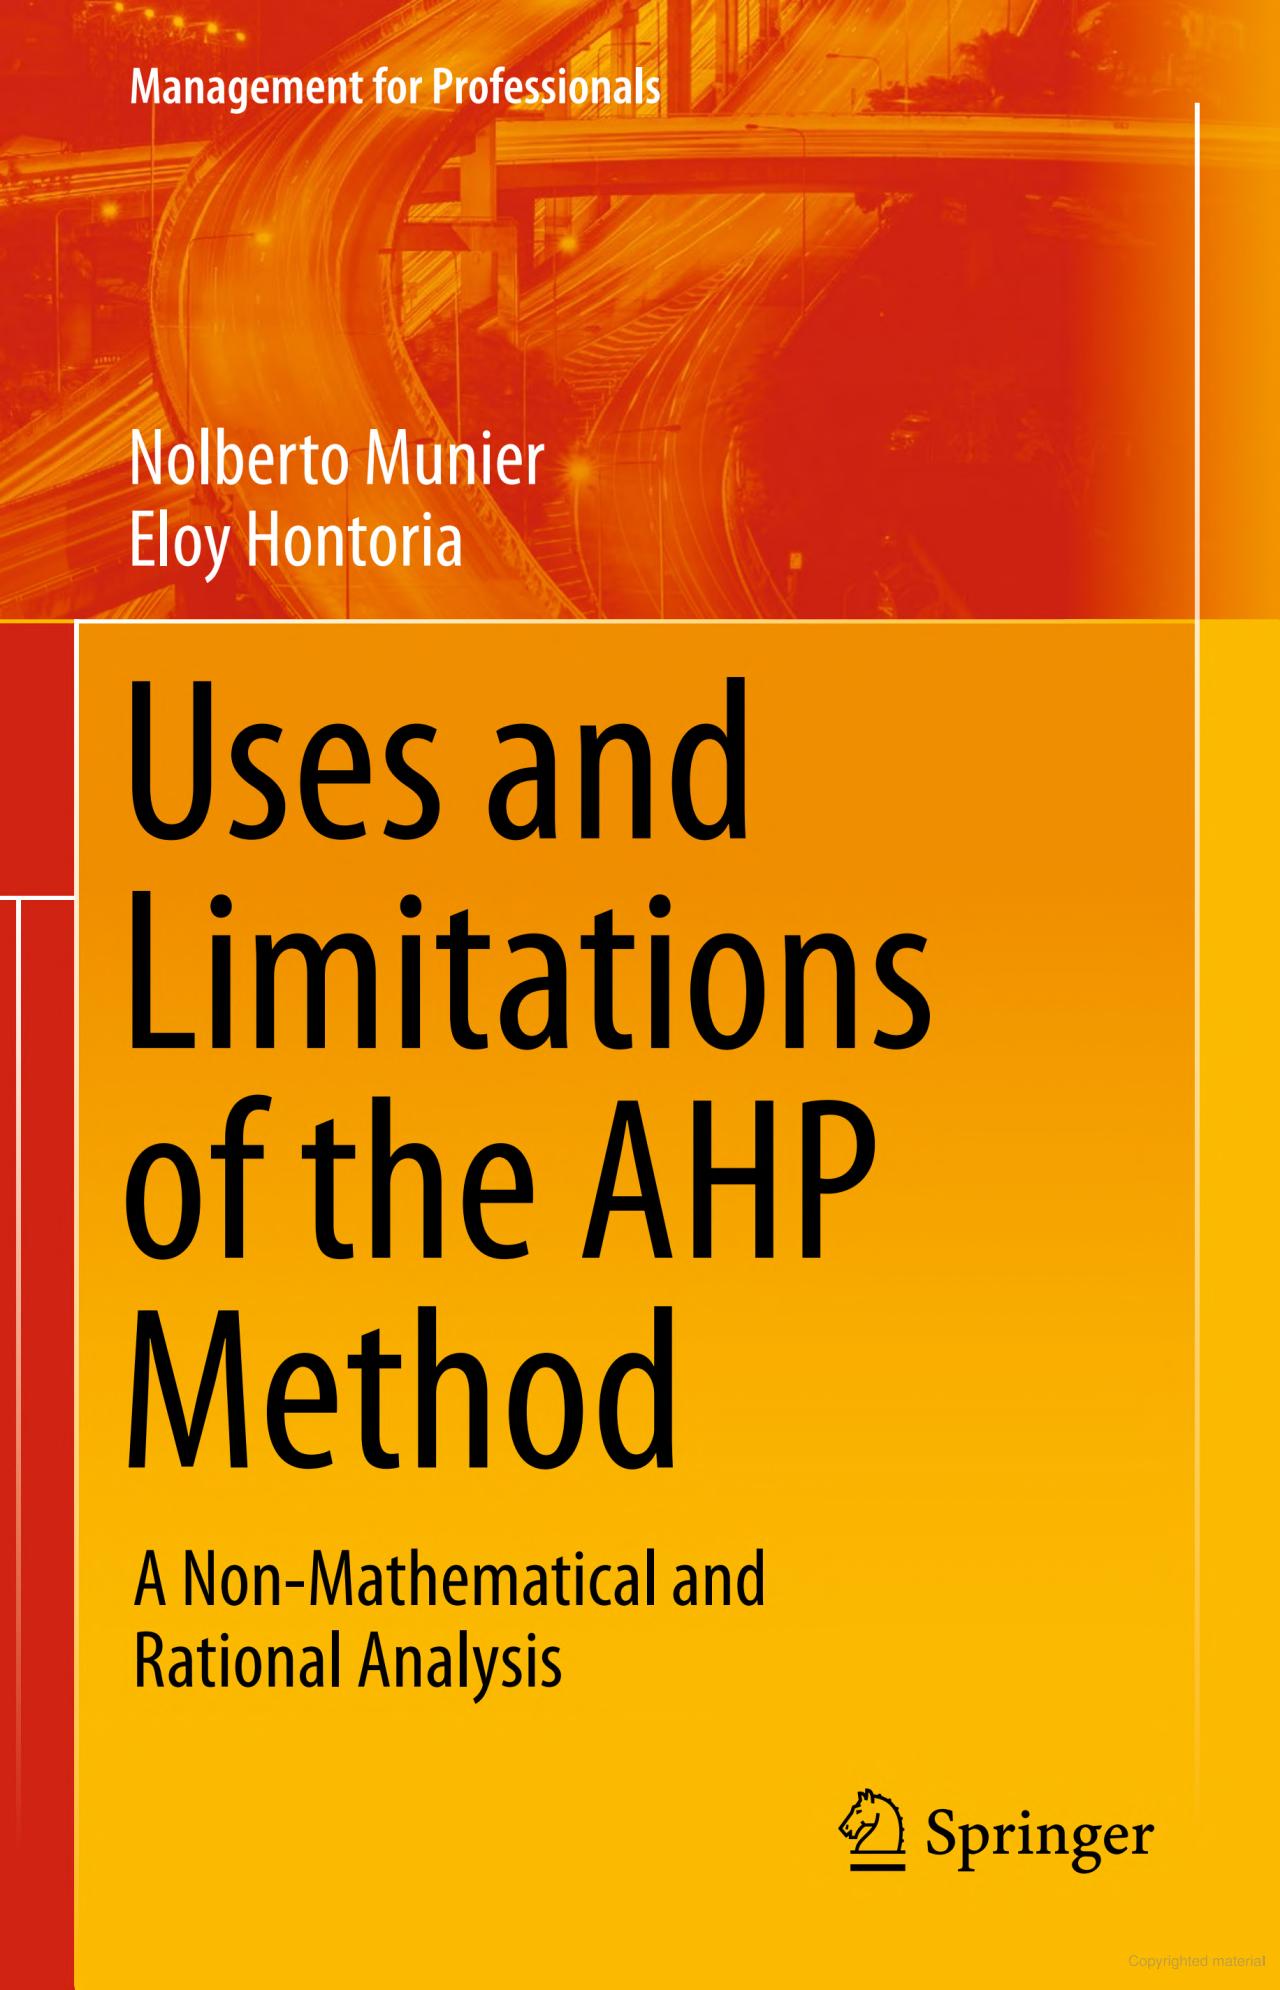 Uses and Limitations of the AHP Method